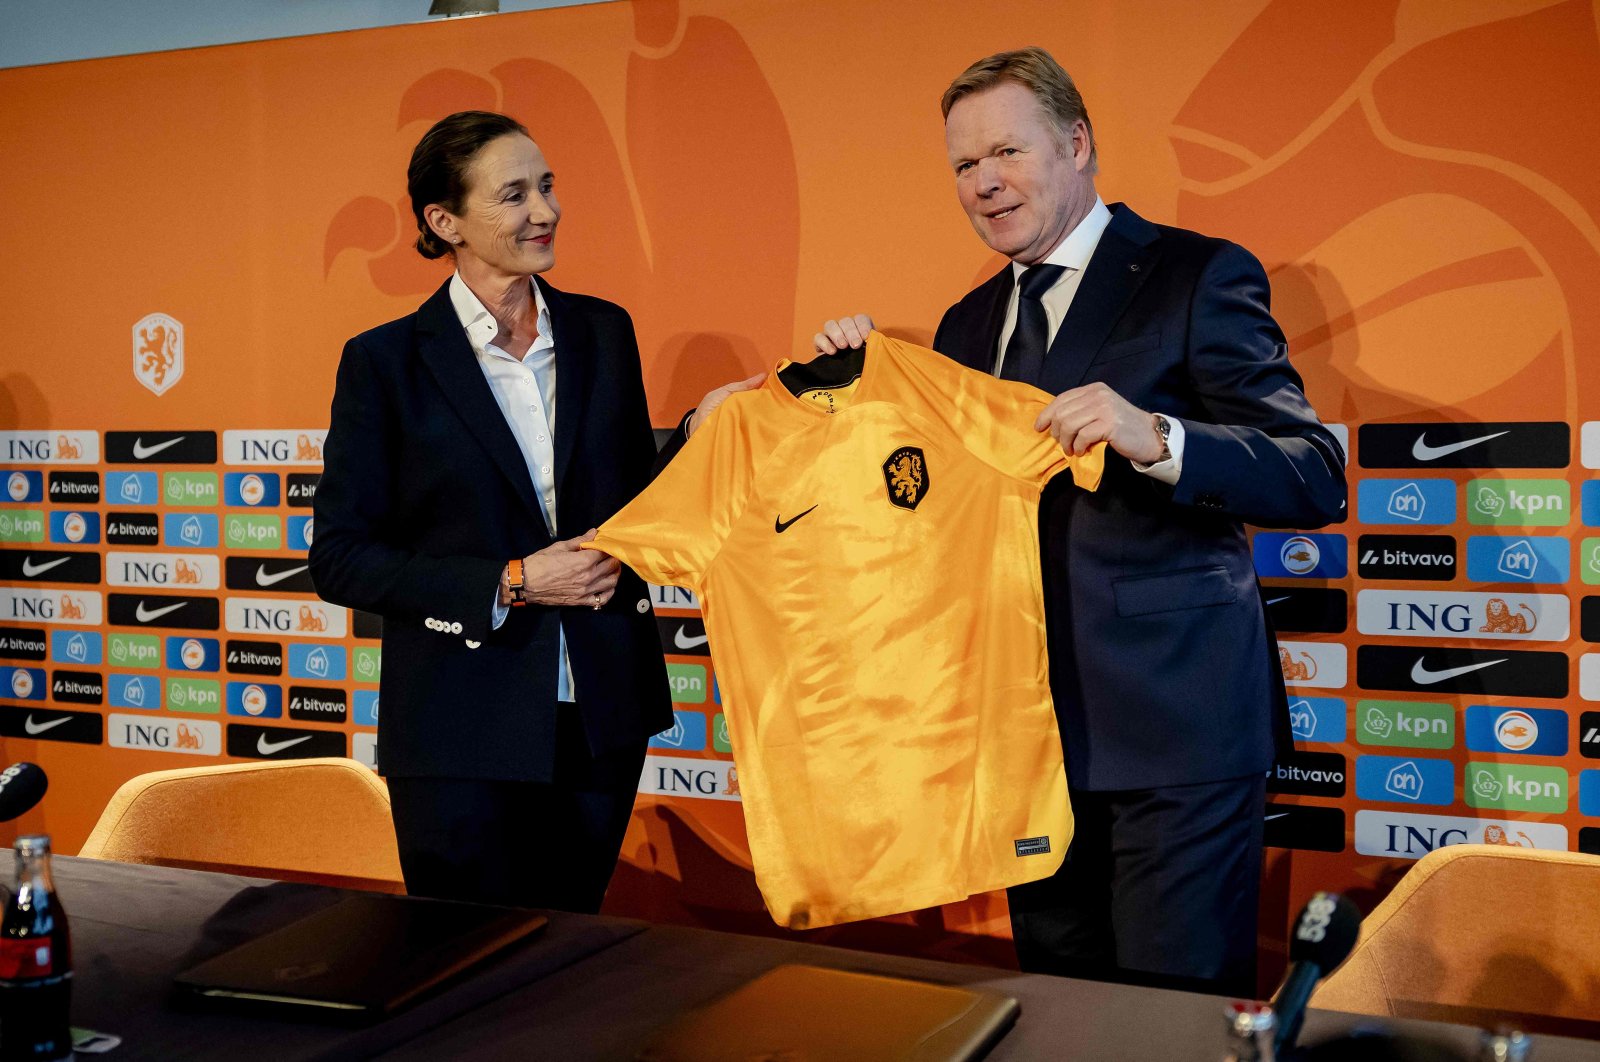 Netherlands&#039; coach Ronald Koeman (R) receives a jersey from KNVB director of professional football Marianne van Leeuwen (L) during  a press conference at the KNVB Campus training center, Zeist, Netherlands, Jan. 23, 2023. (AFP Photo)